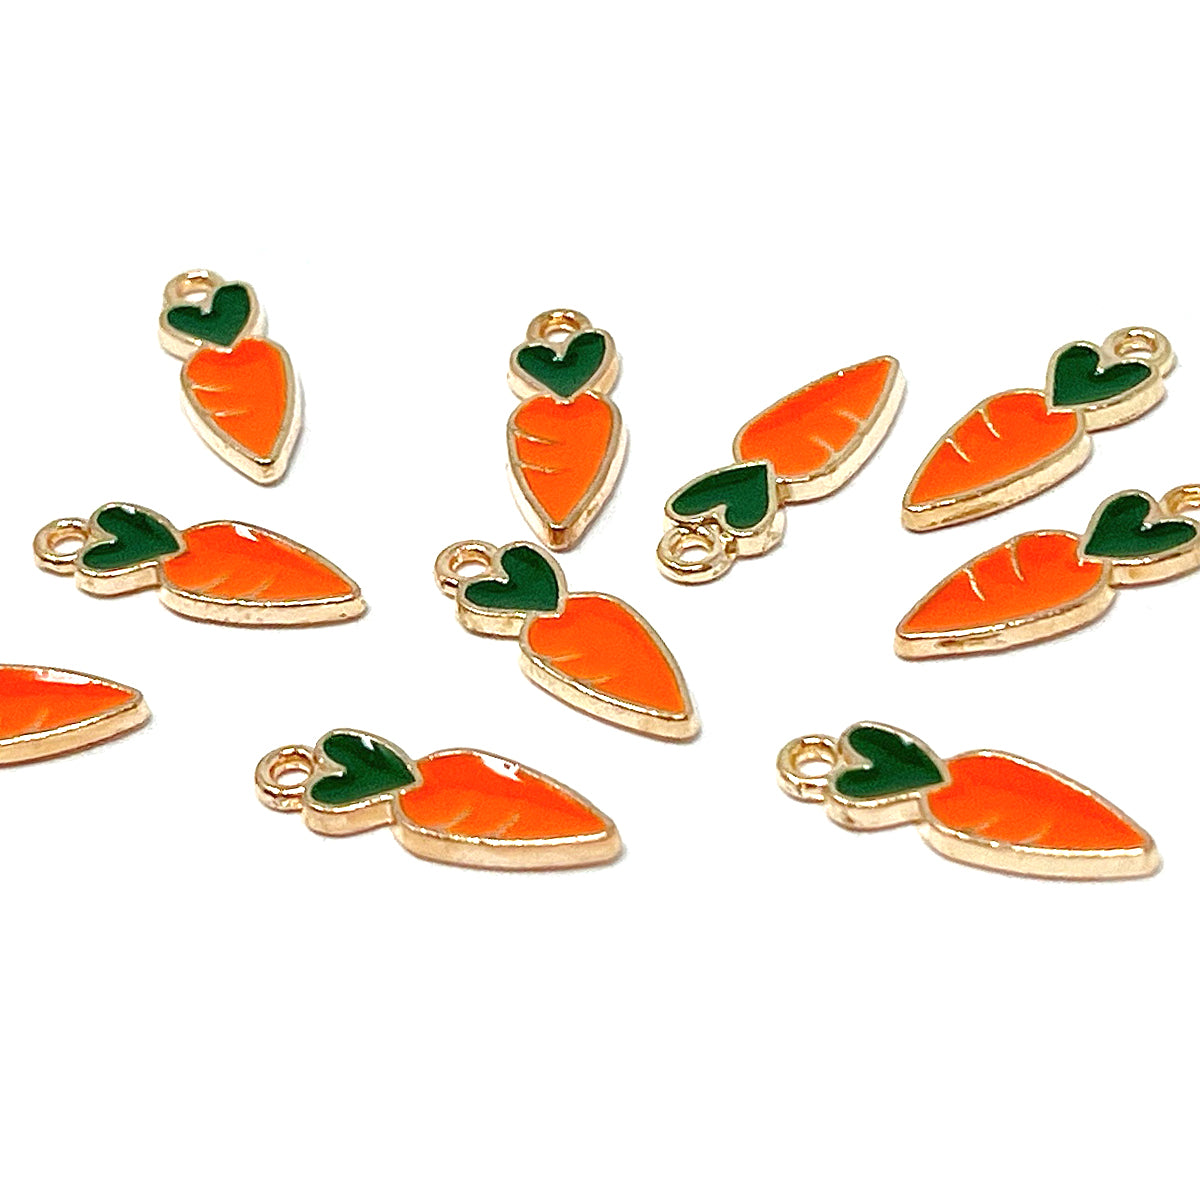 Wrapables Jewelry Charms for Jewelry Making Enamel Pendants (Set of 10) Carrots